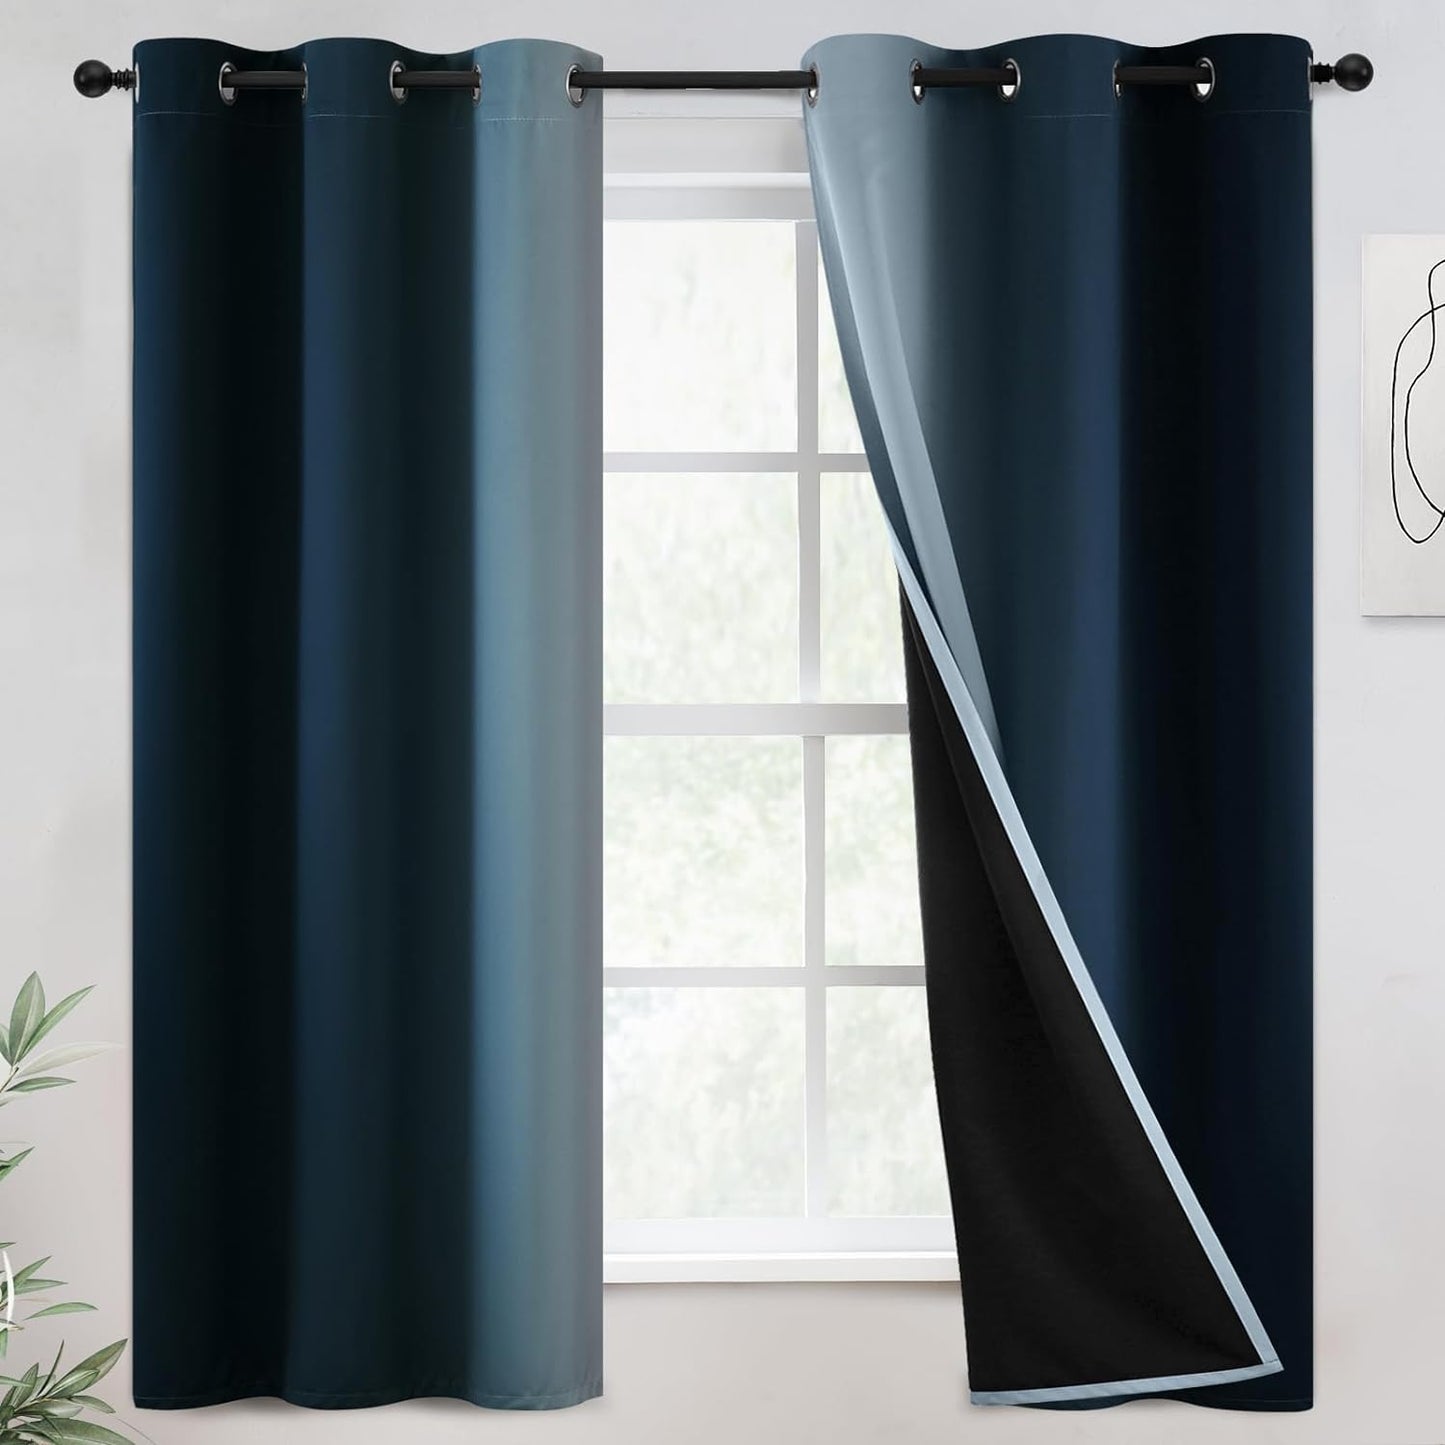 COSVIYA 100% Blackout Curtains & Drapes Ombre Purple Curtains 63 Inch Length 2 Panels,Full Room Darkening Grommet Gradient Insulated Thermal Window Curtains for Bedroom/Living Room,52X63 Inches  COSVIYA Blackout Navy To Grayish White 42W X 63L 